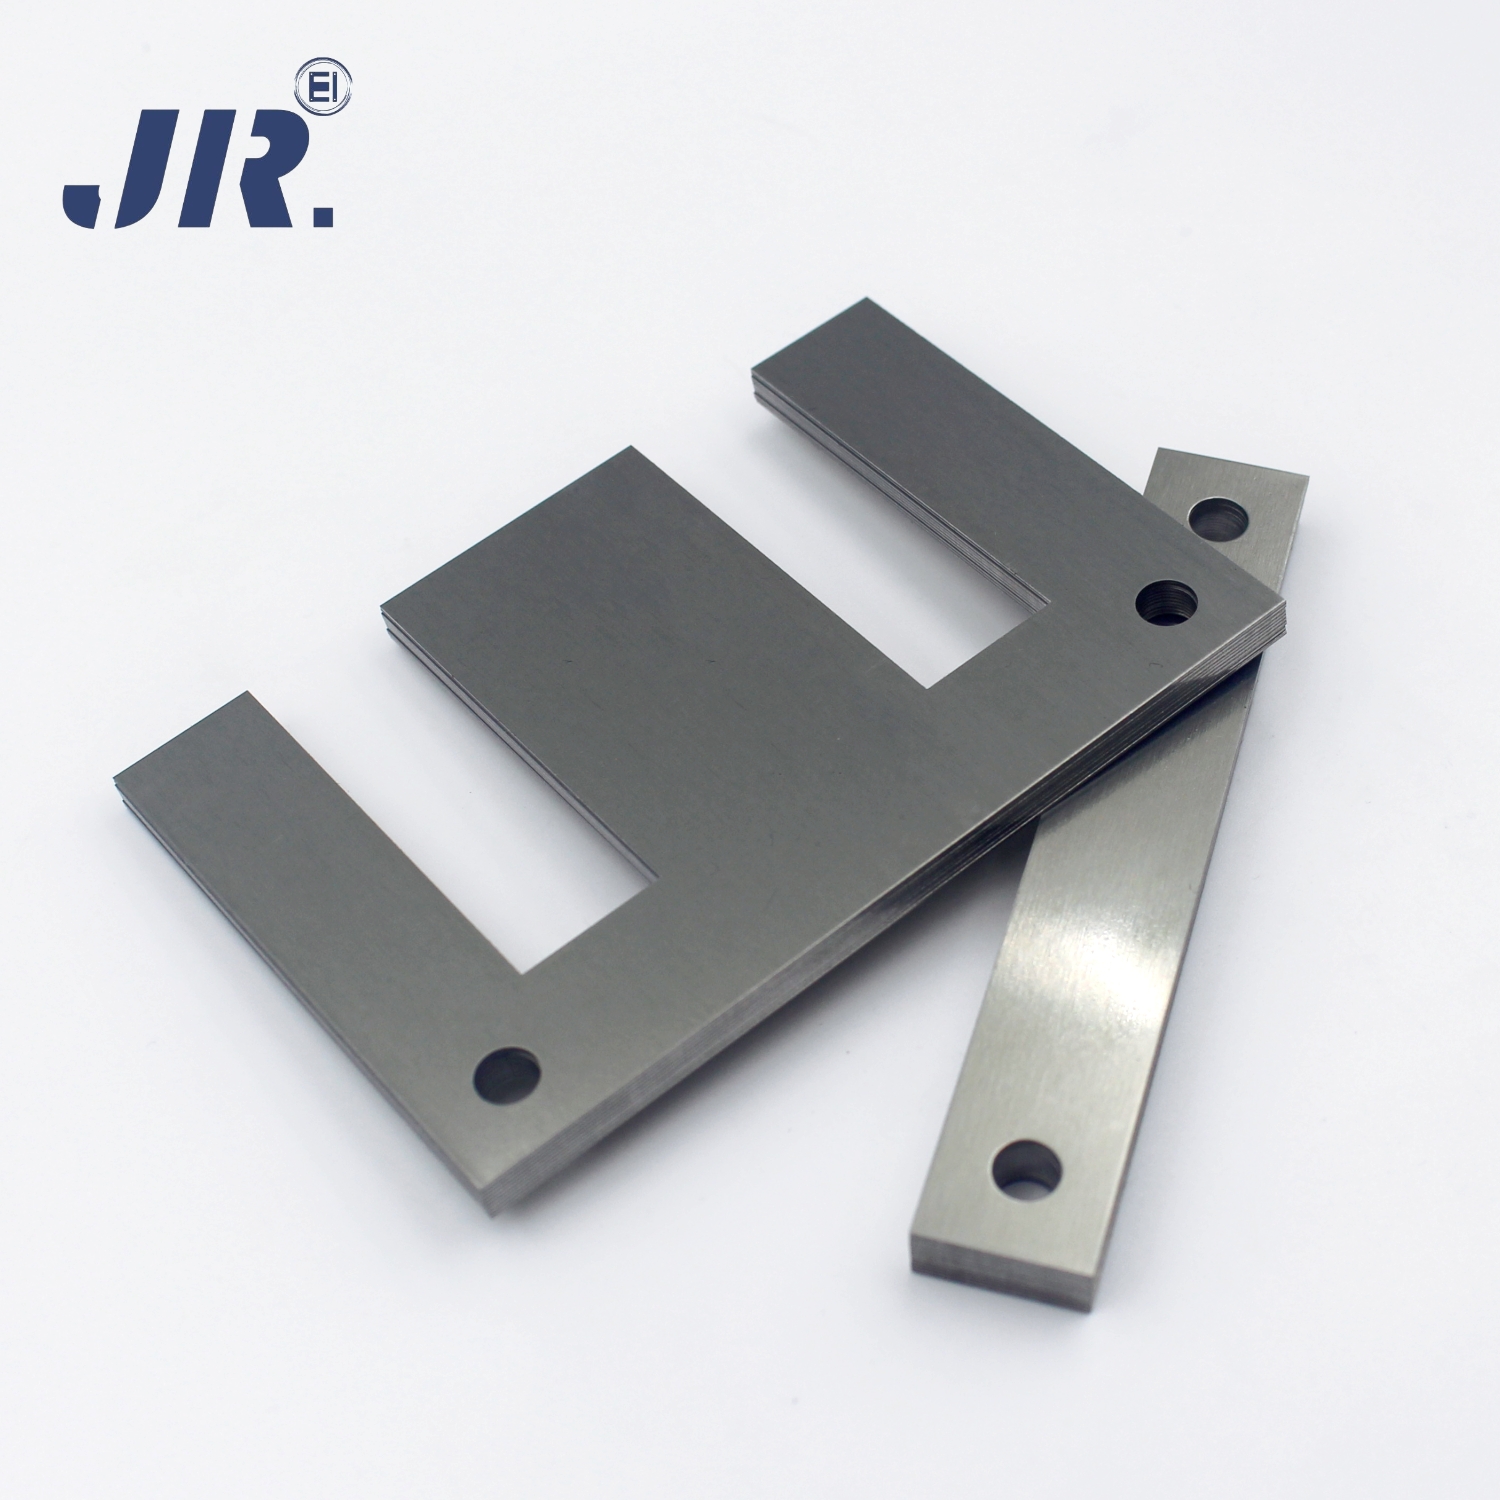 Cold Rolled Non Grain Oriented Steel (CRNGO) Annealed Silicon Steel Lamination